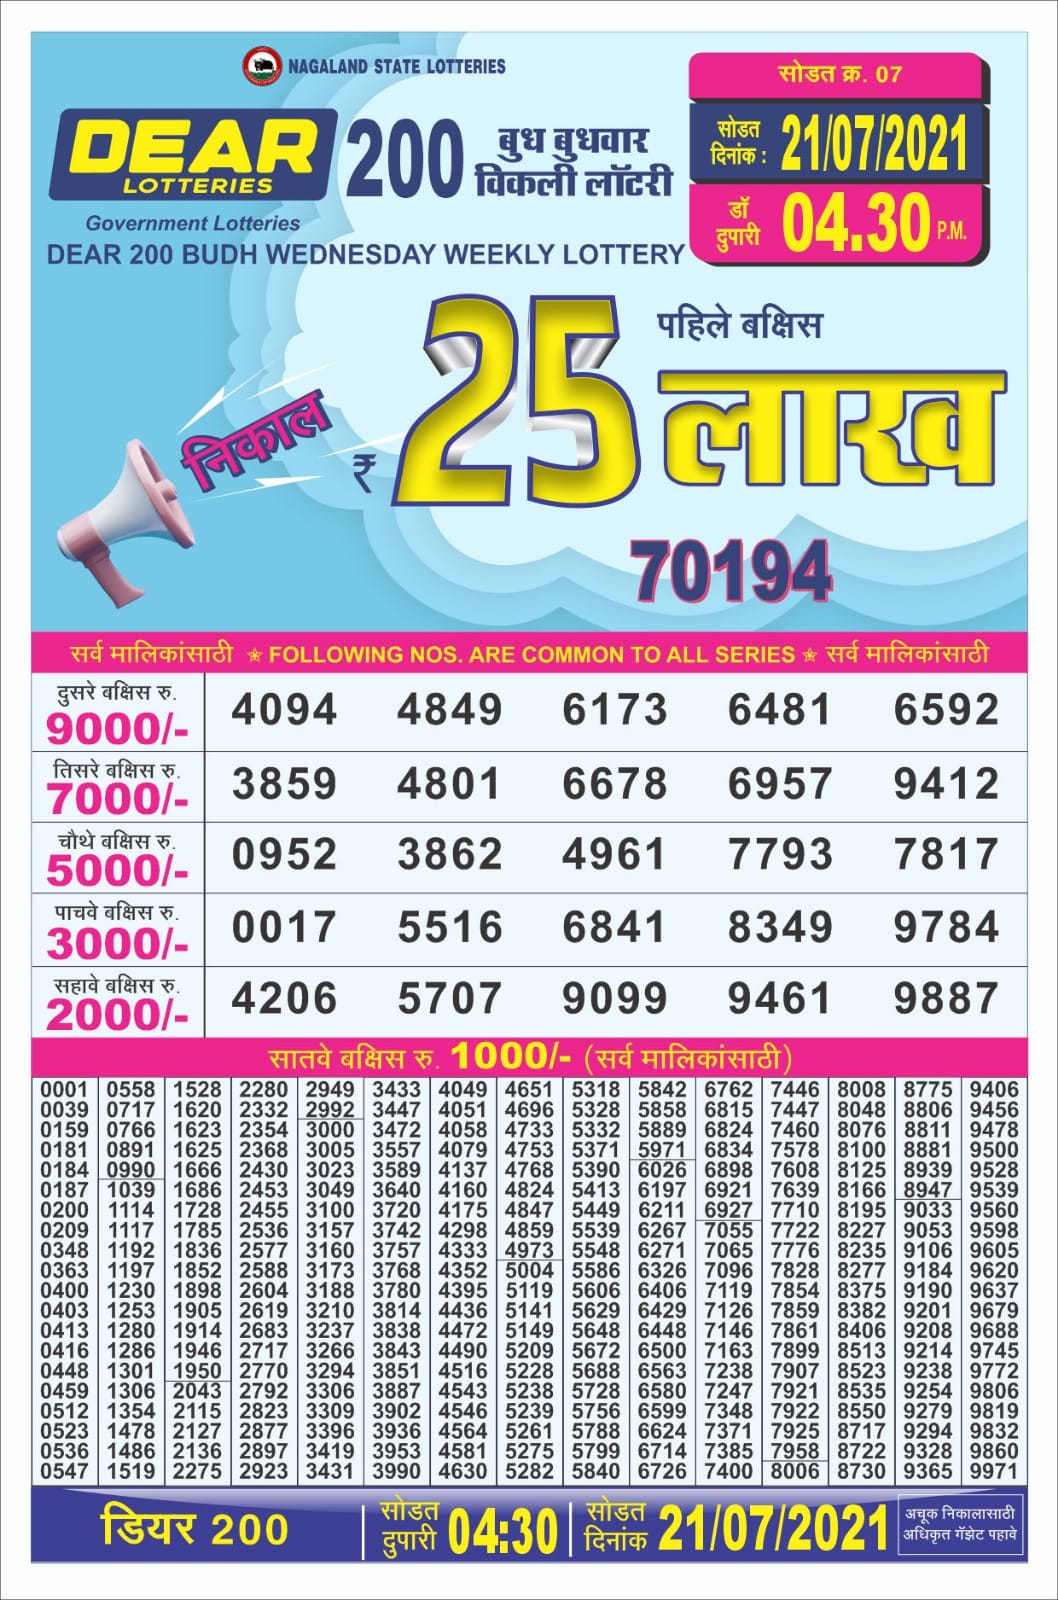 Dear 200 budh weekly lottery 04-30 pm 21-07-2021